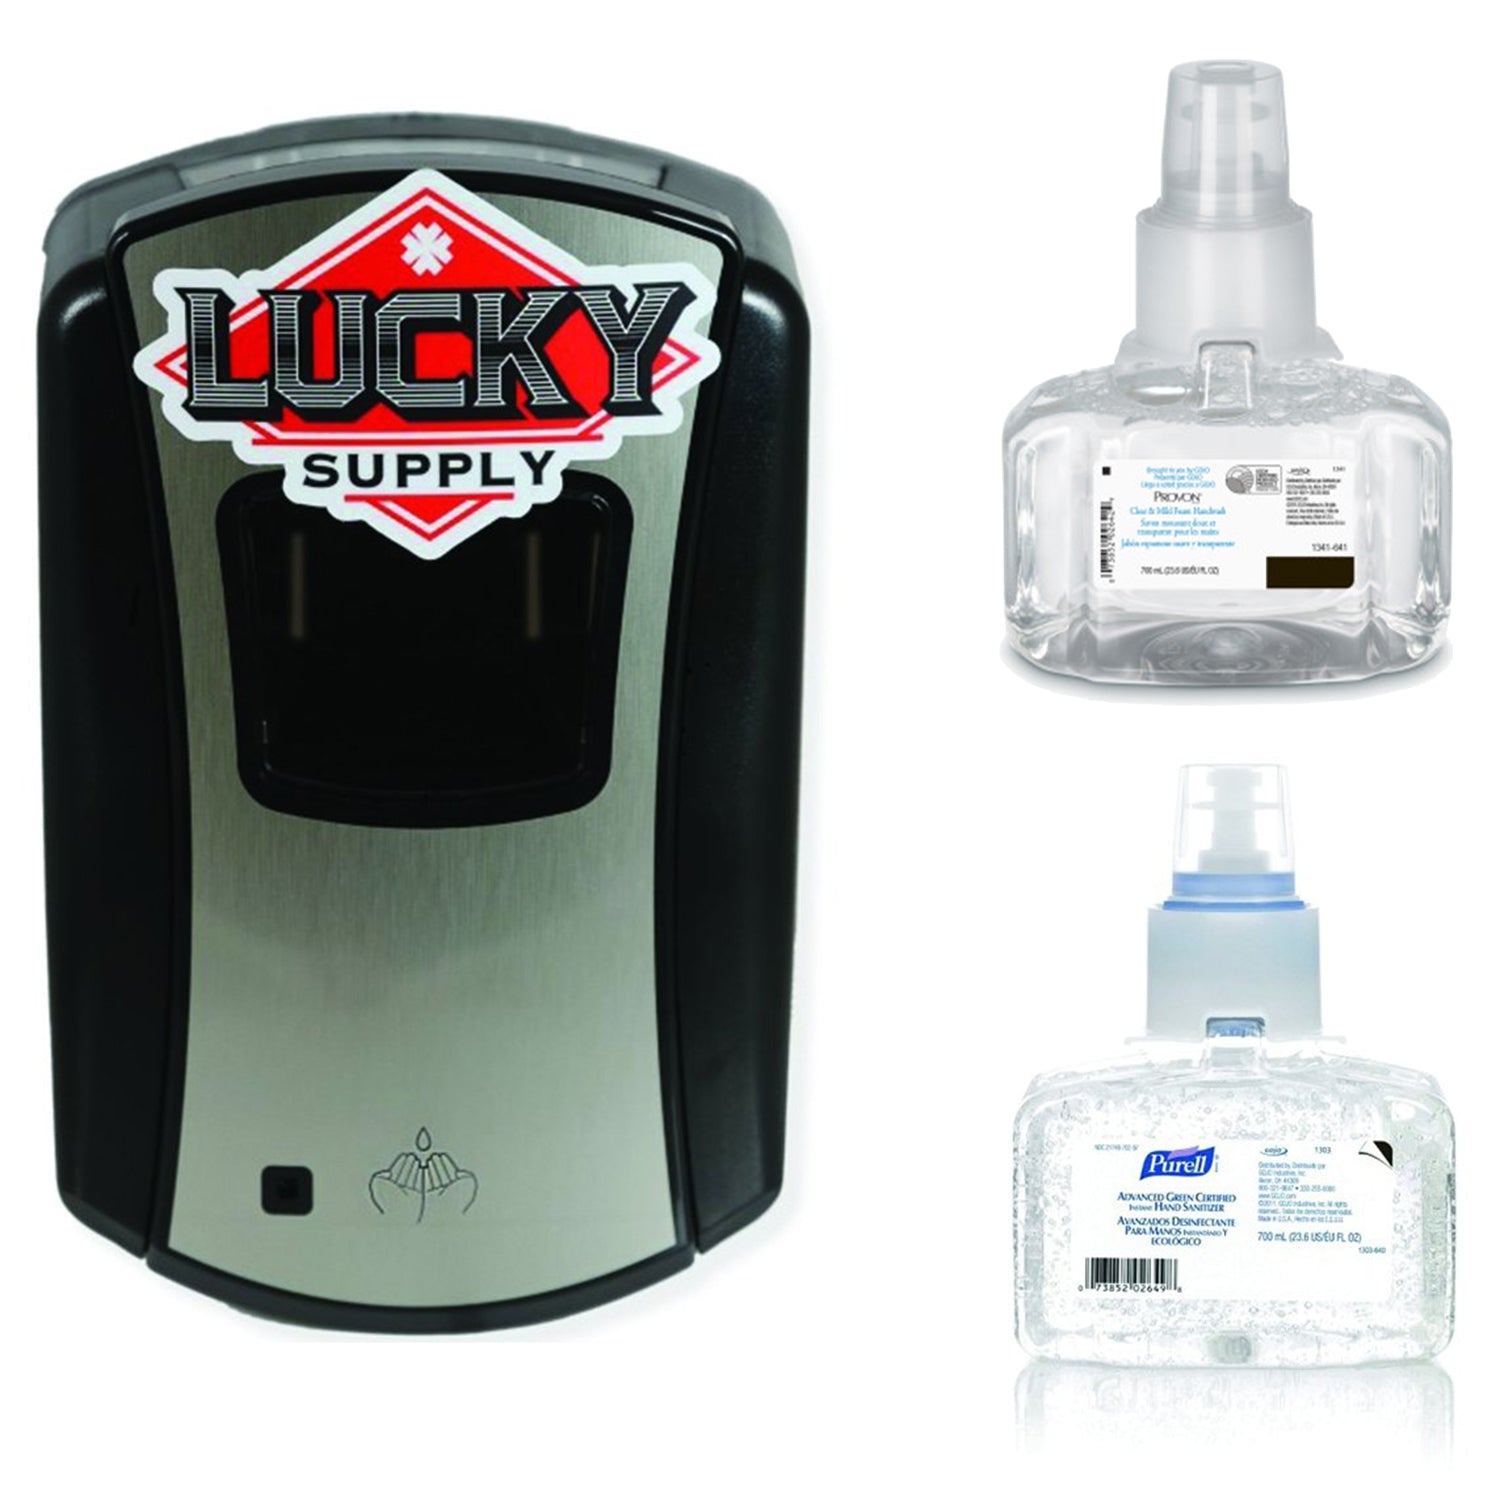 Soap and Sanitizer Dispensers & Refills